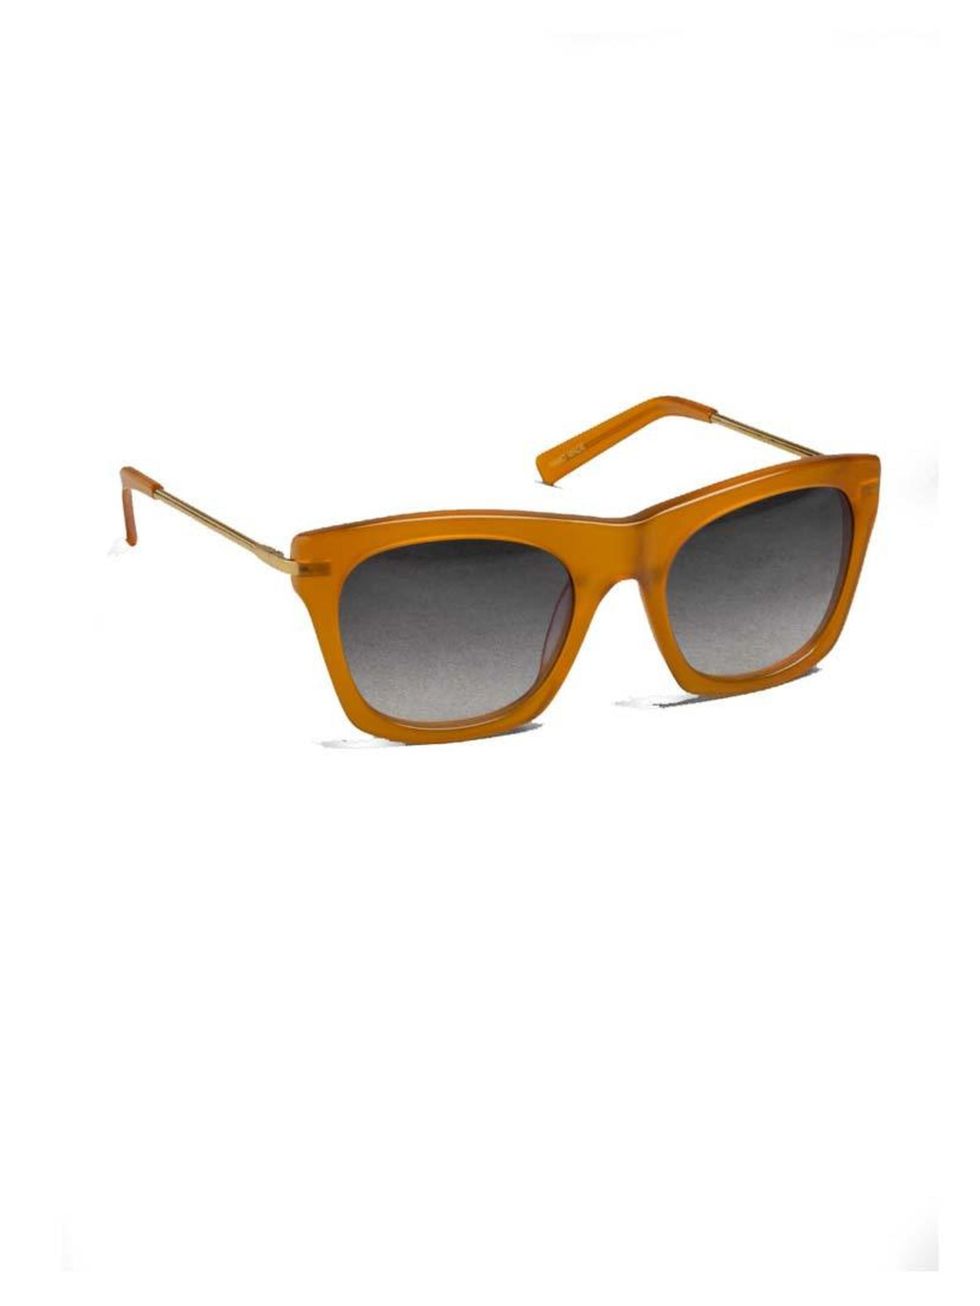 <p>Flattering tone - even sans tan. </p><p>£45 by <a href="http://www.stories.com/Accessories/Sunglasses/Square_frame_sunglasses/582820-3357782.1">&amp;OtherStories </a></p>